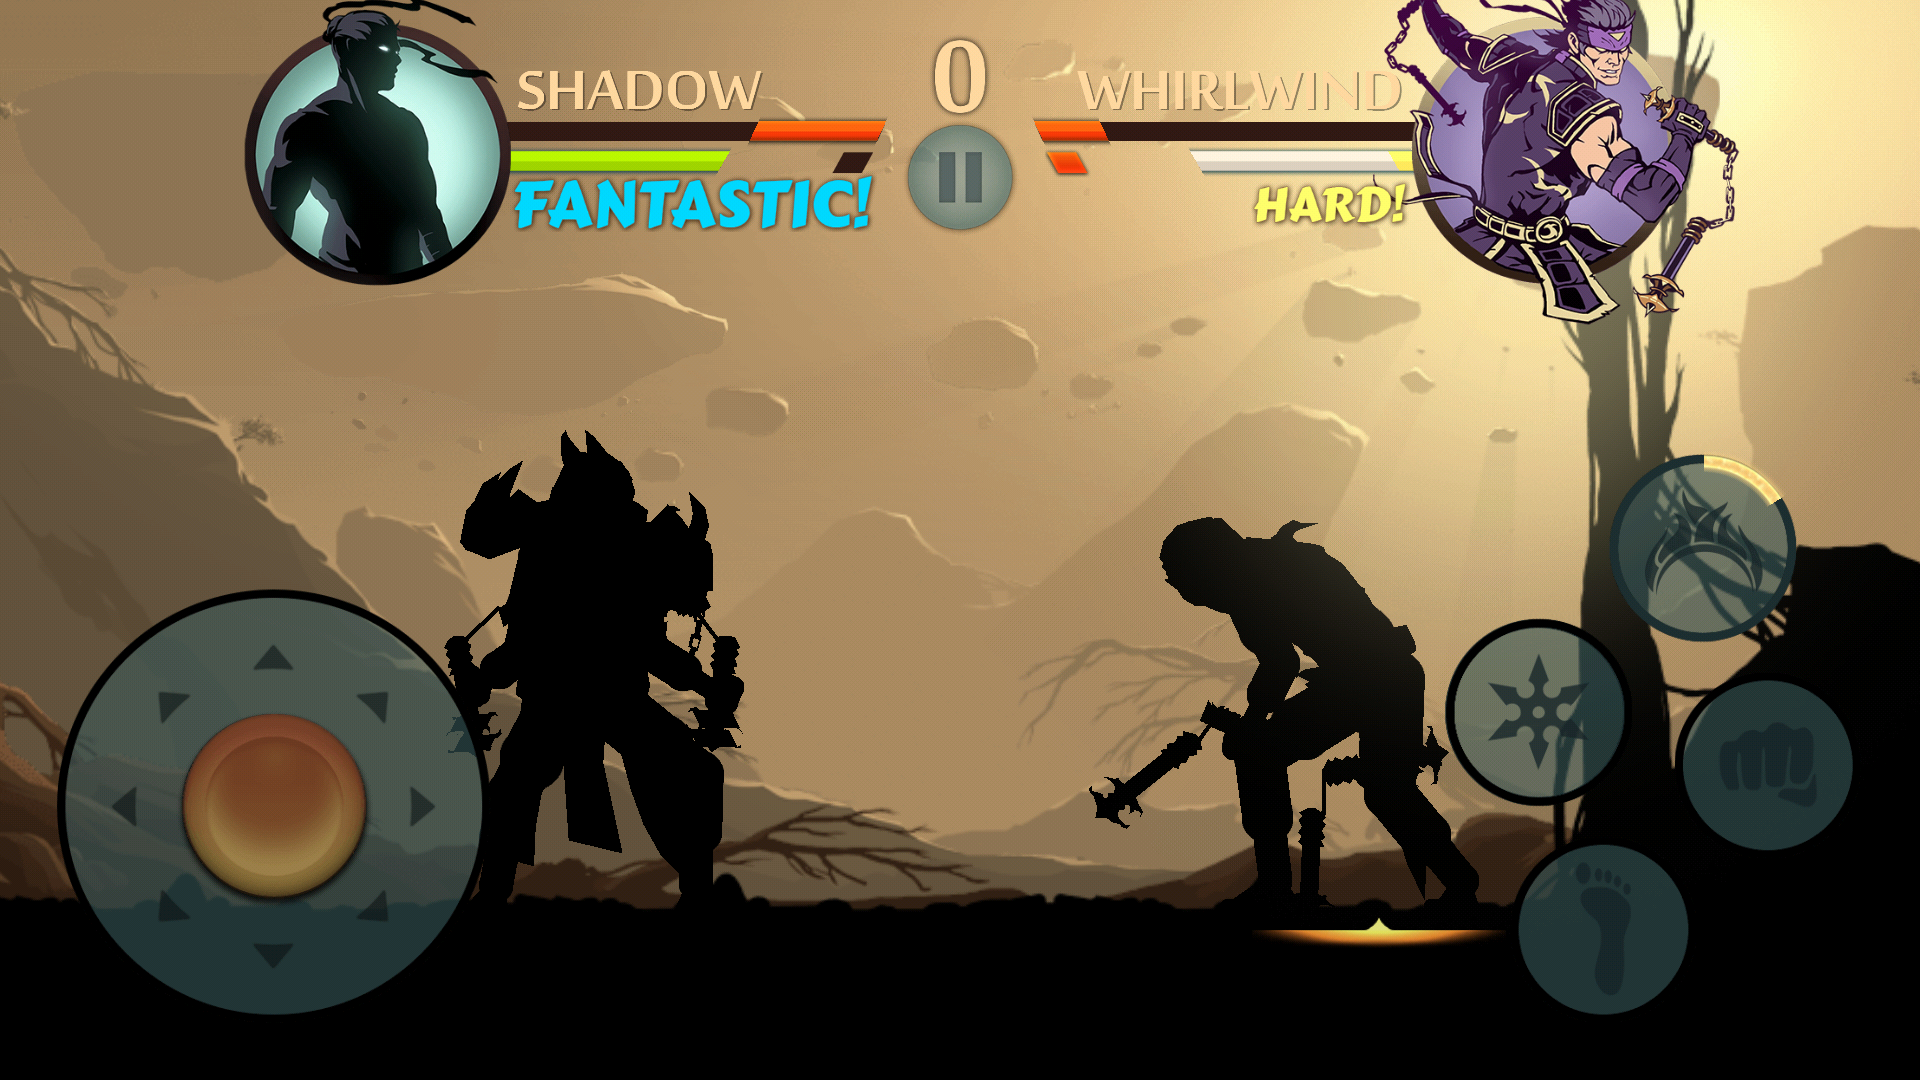 1n03t7ehqT7ibO zDGeZ4WQ - Shadow Fight 2 Mod Apk Special Edition V2.22.1 (Unlimited Money)